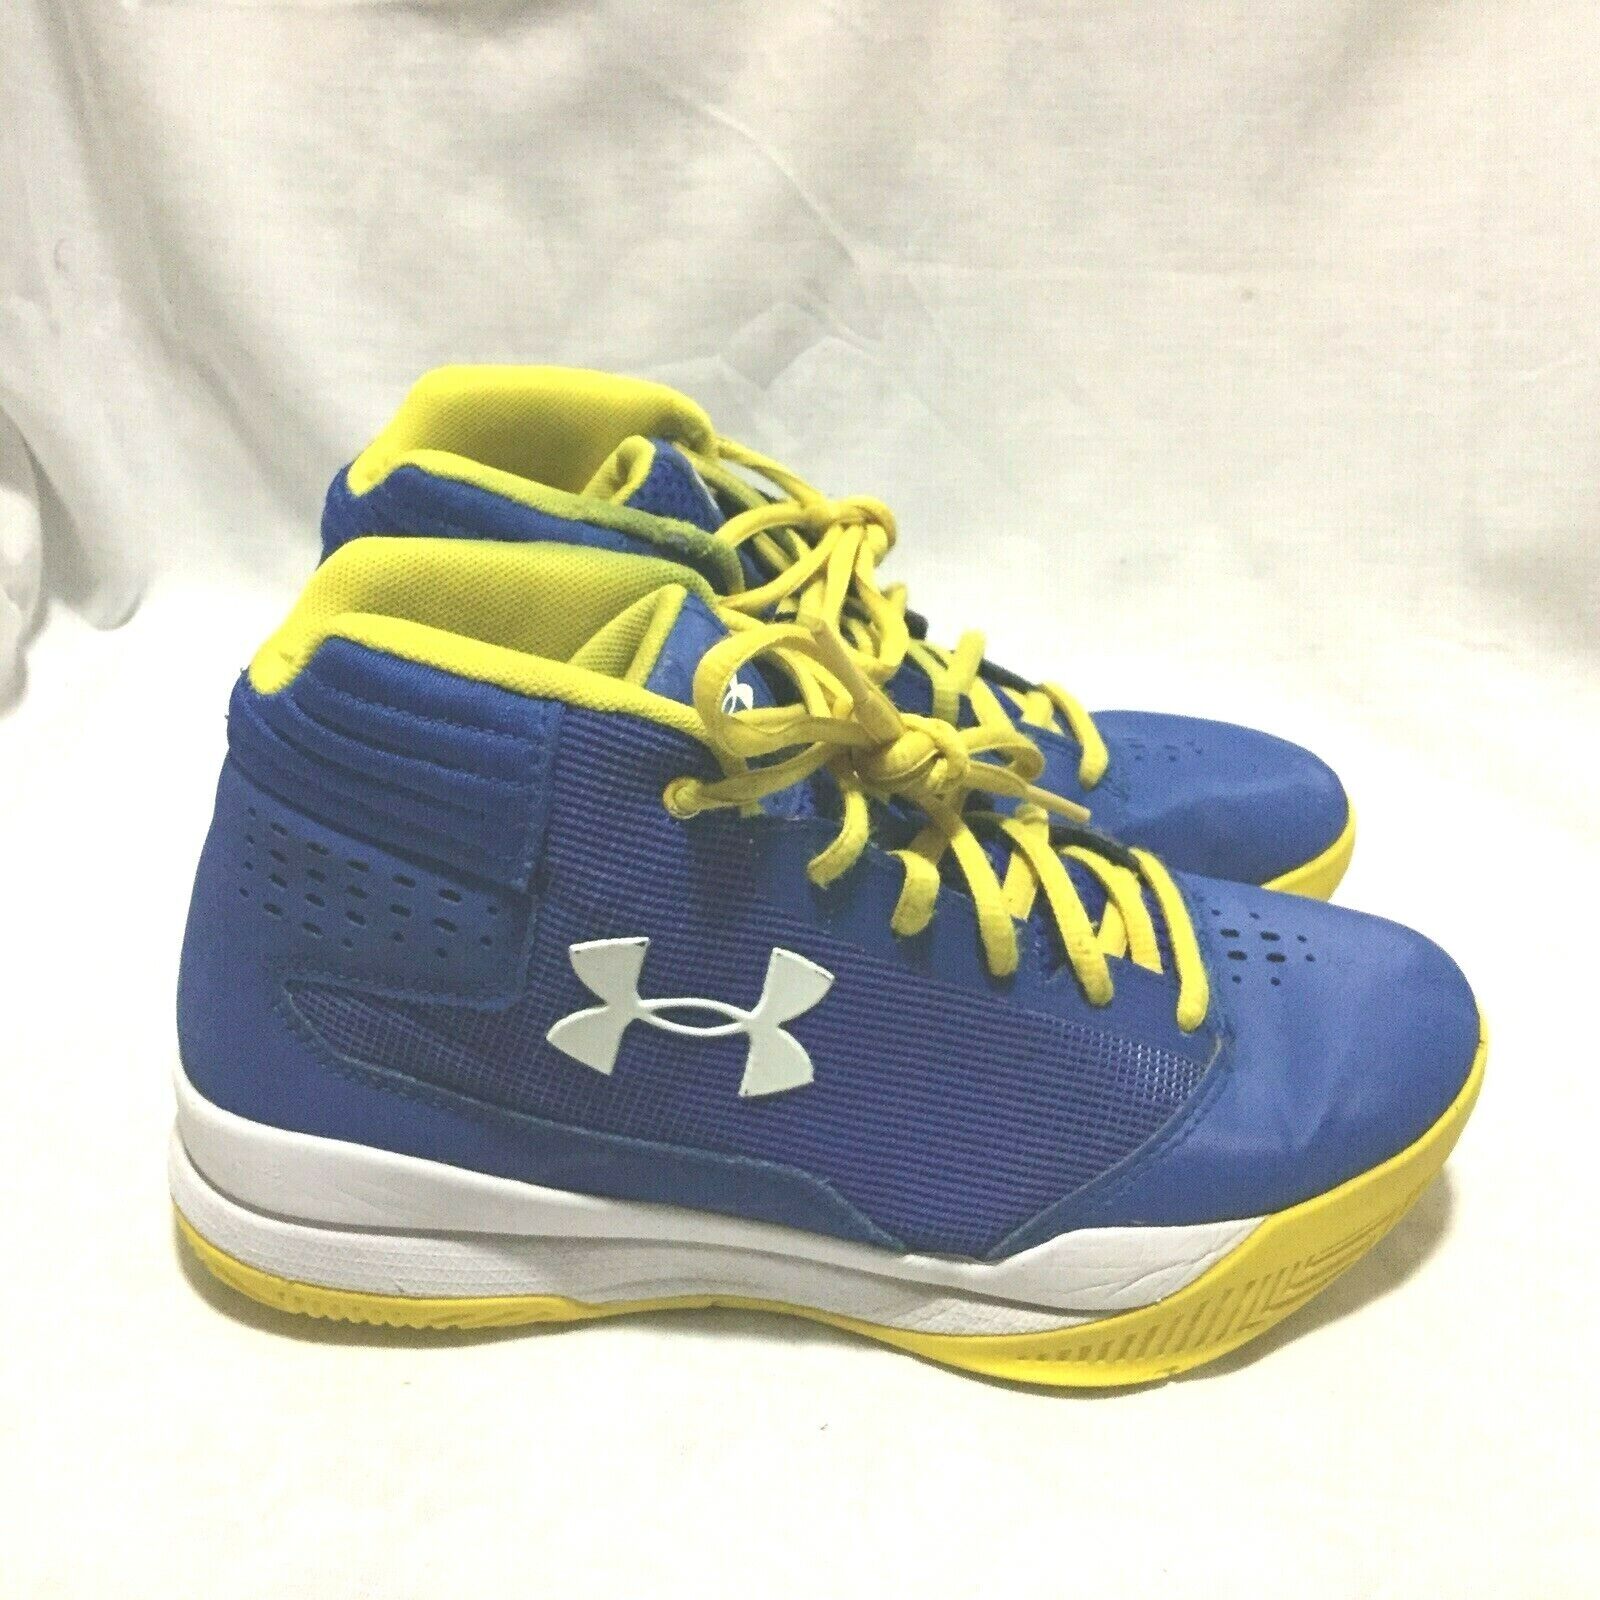 Under Armour Basketball Shoes Multi Color Size 5 Youth